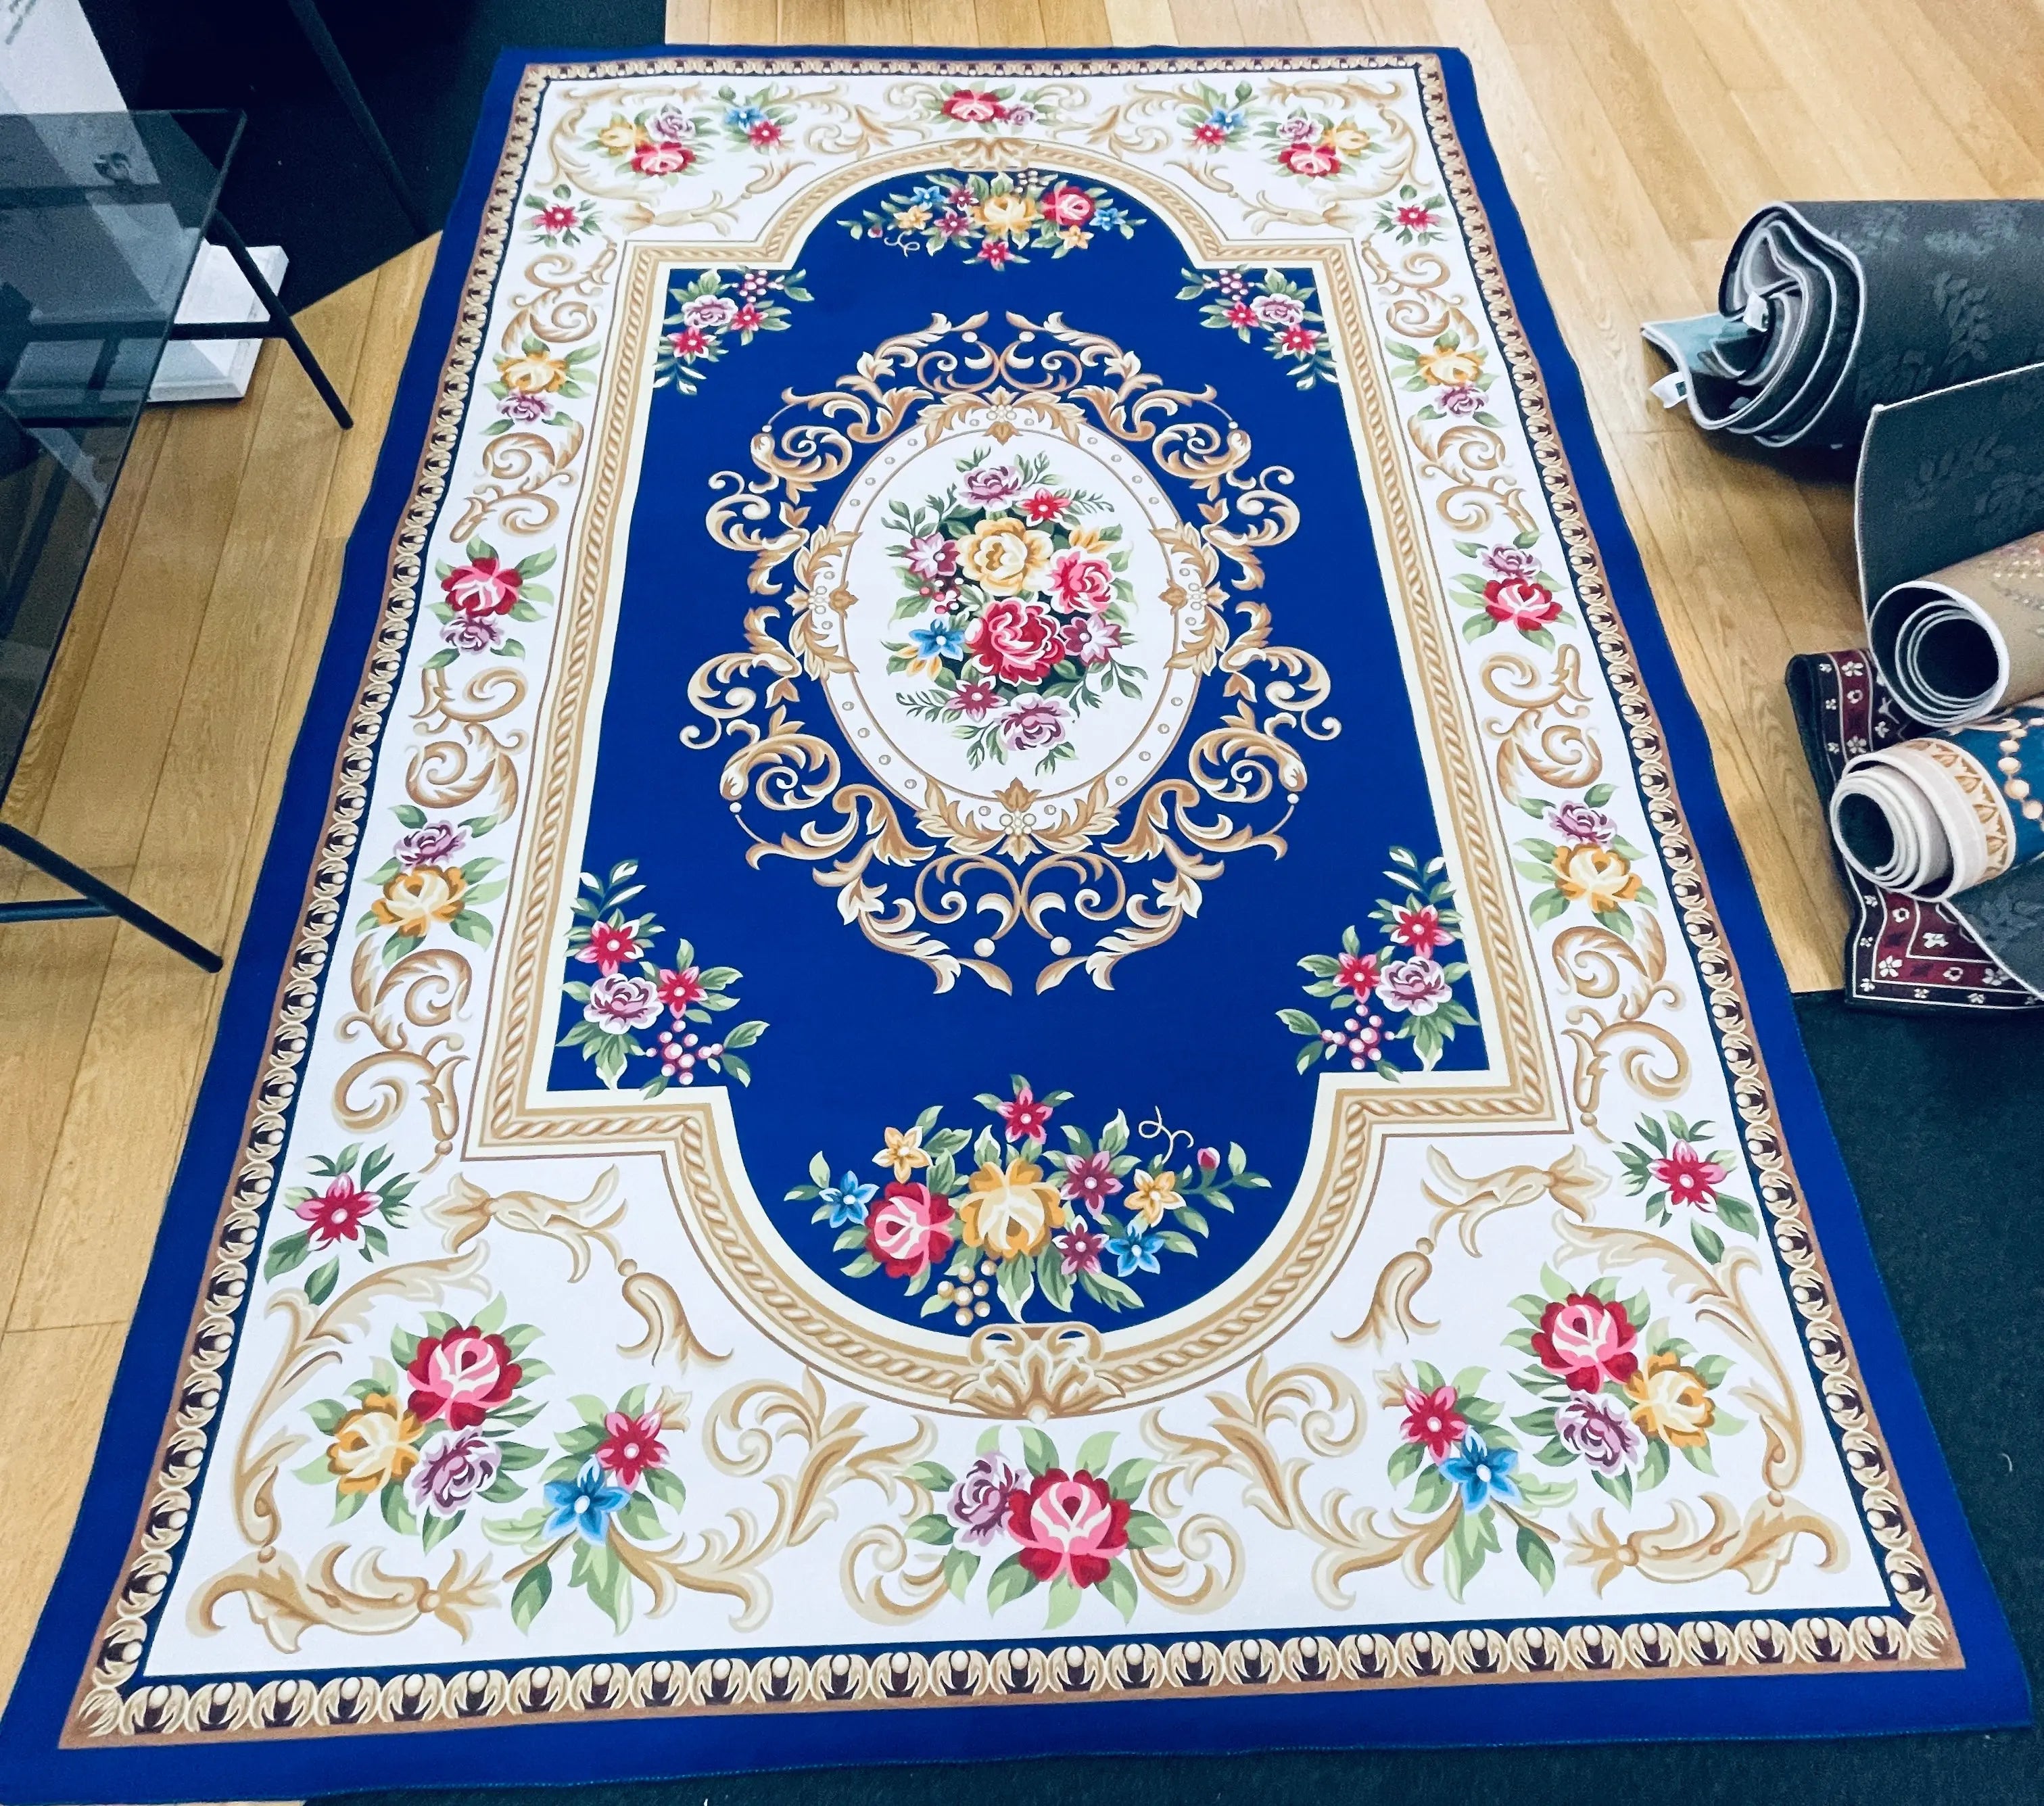 OS 69 Persian Style Rug The Carpet Maker